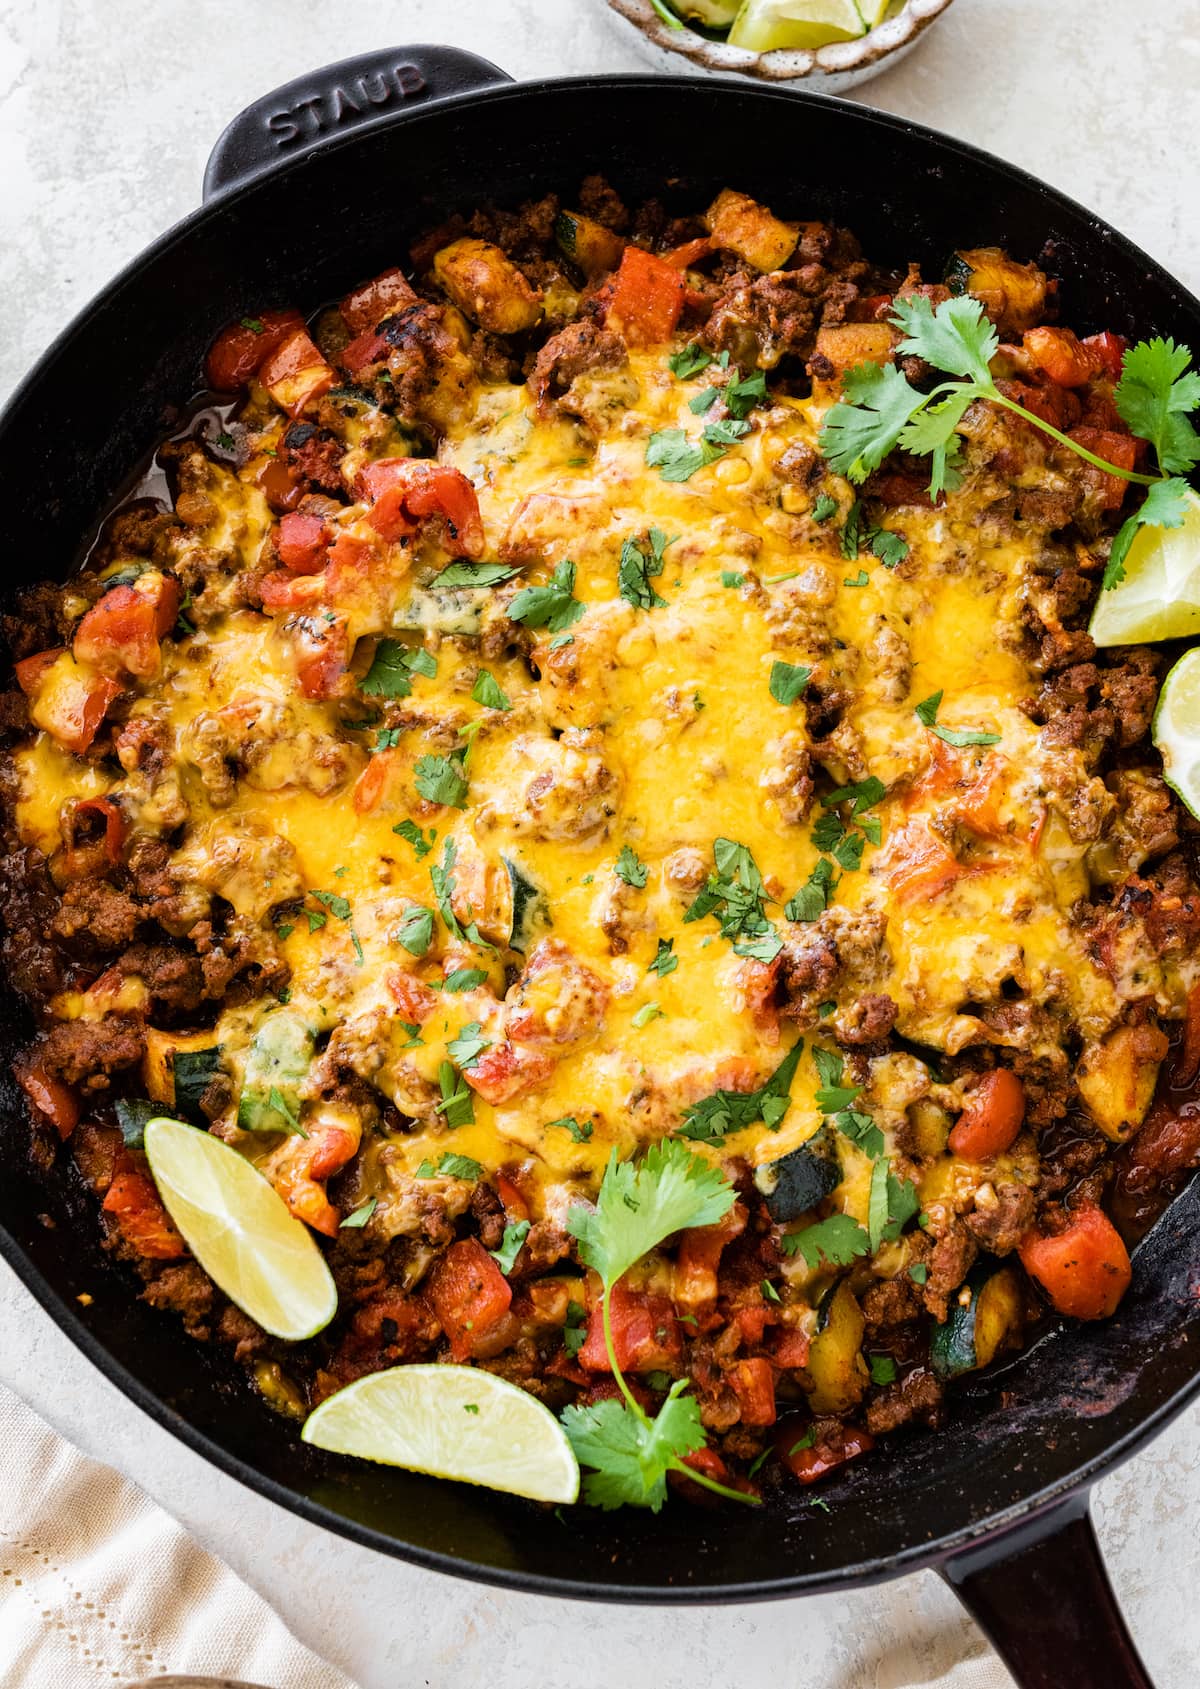 Ground Beef and Squash Skillet - Eating Bird Food